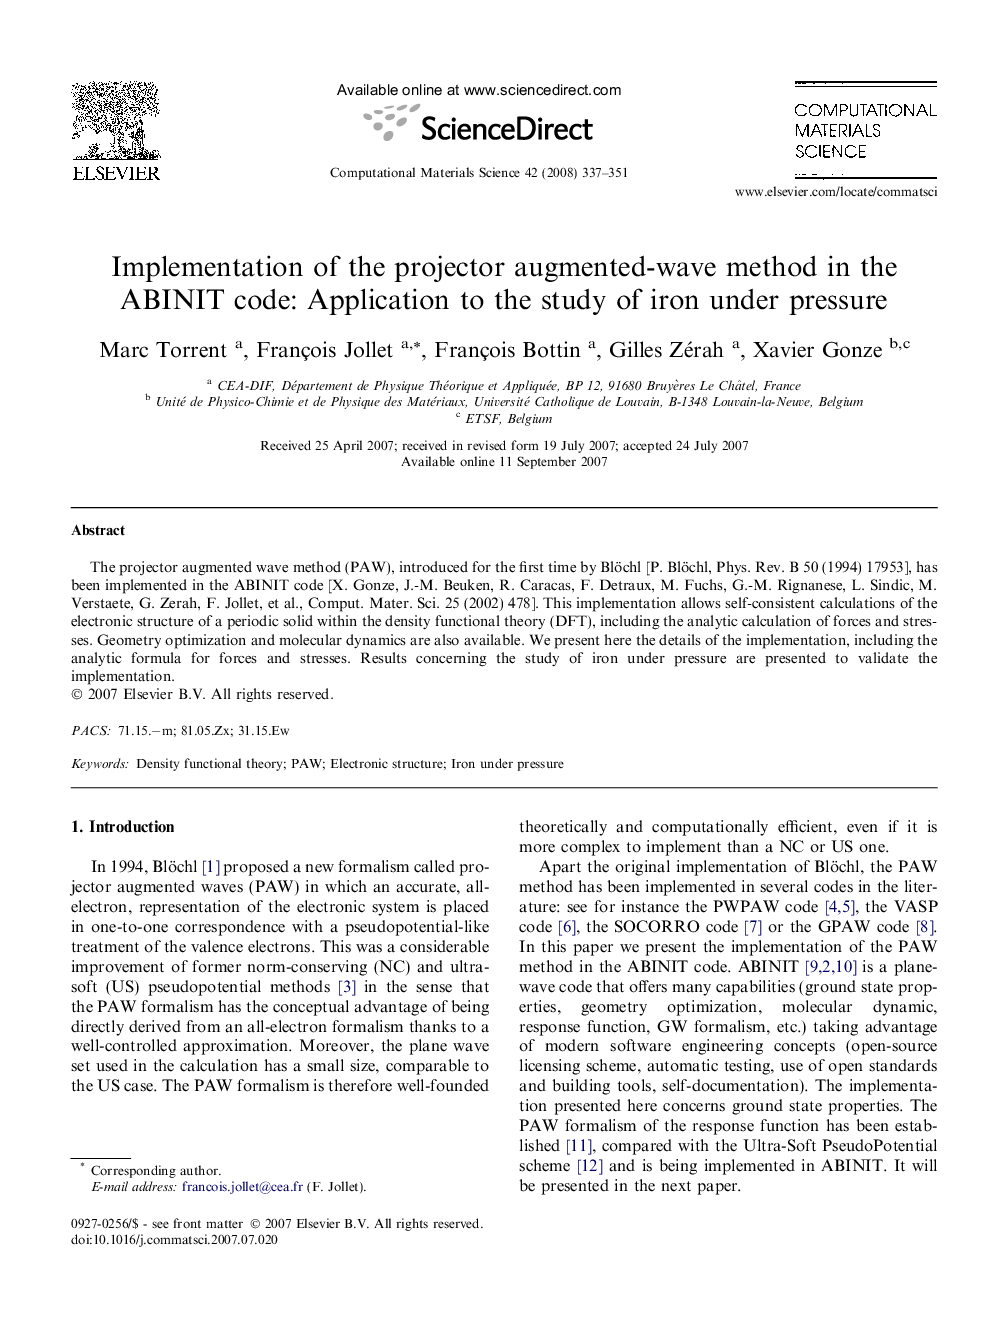 Implementation of the projector augmented-wave method in the ABINIT code: Application to the study of iron under pressure